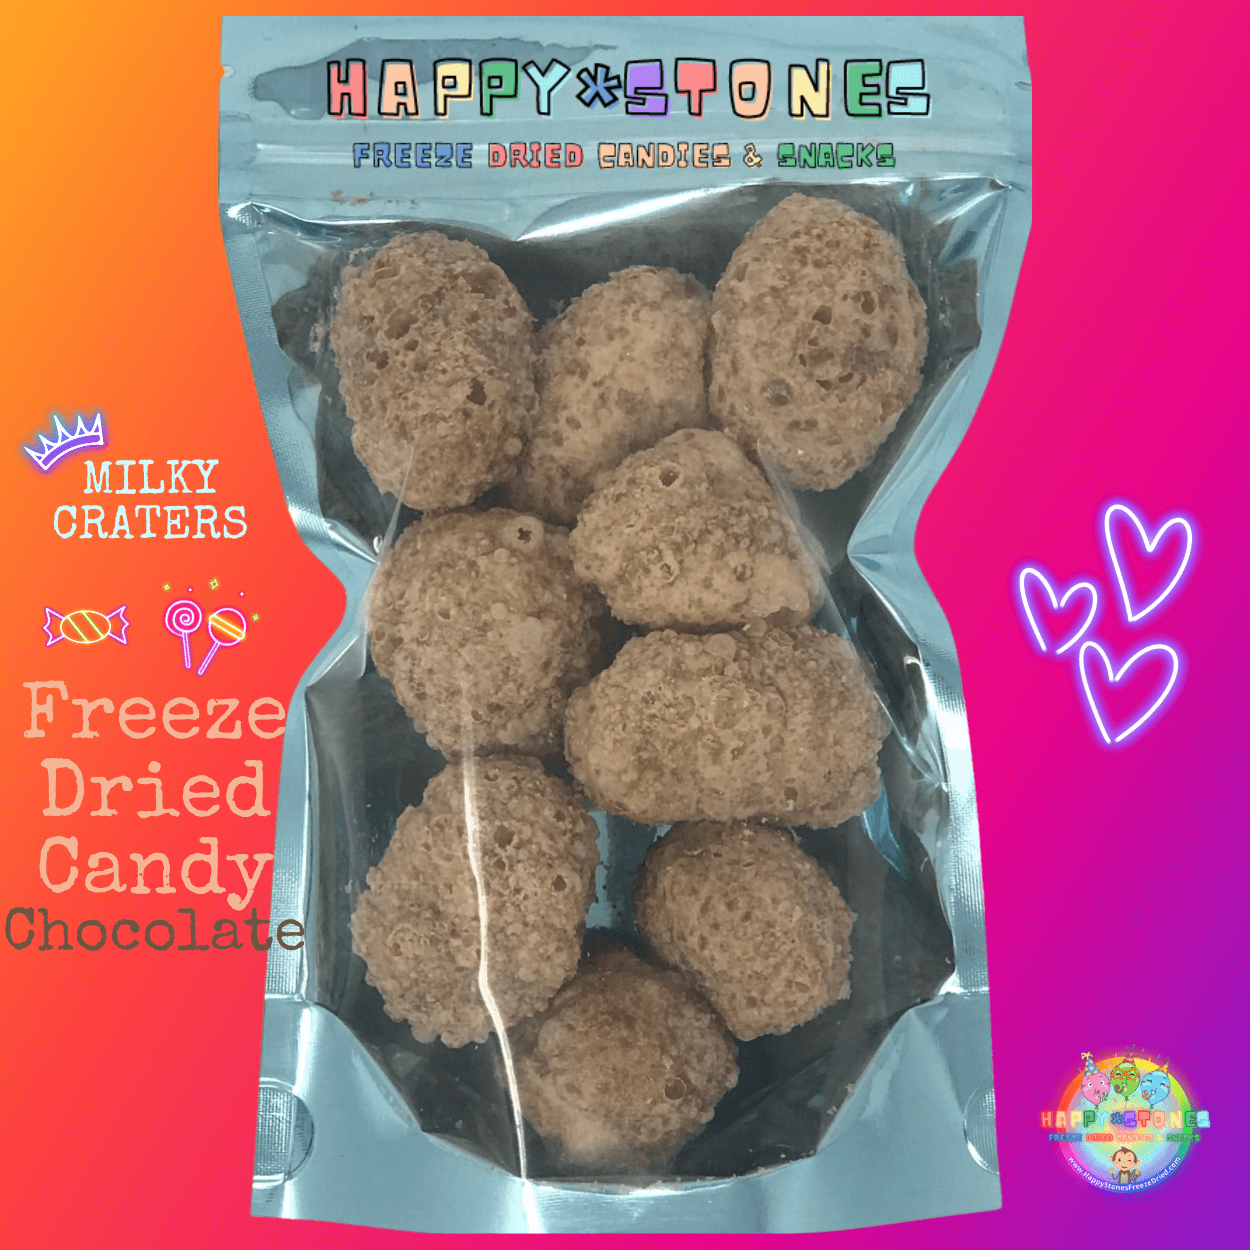 Freeze Dried Chocolate Candy: MILKY CRATERS Happy Stones Freeze Dried